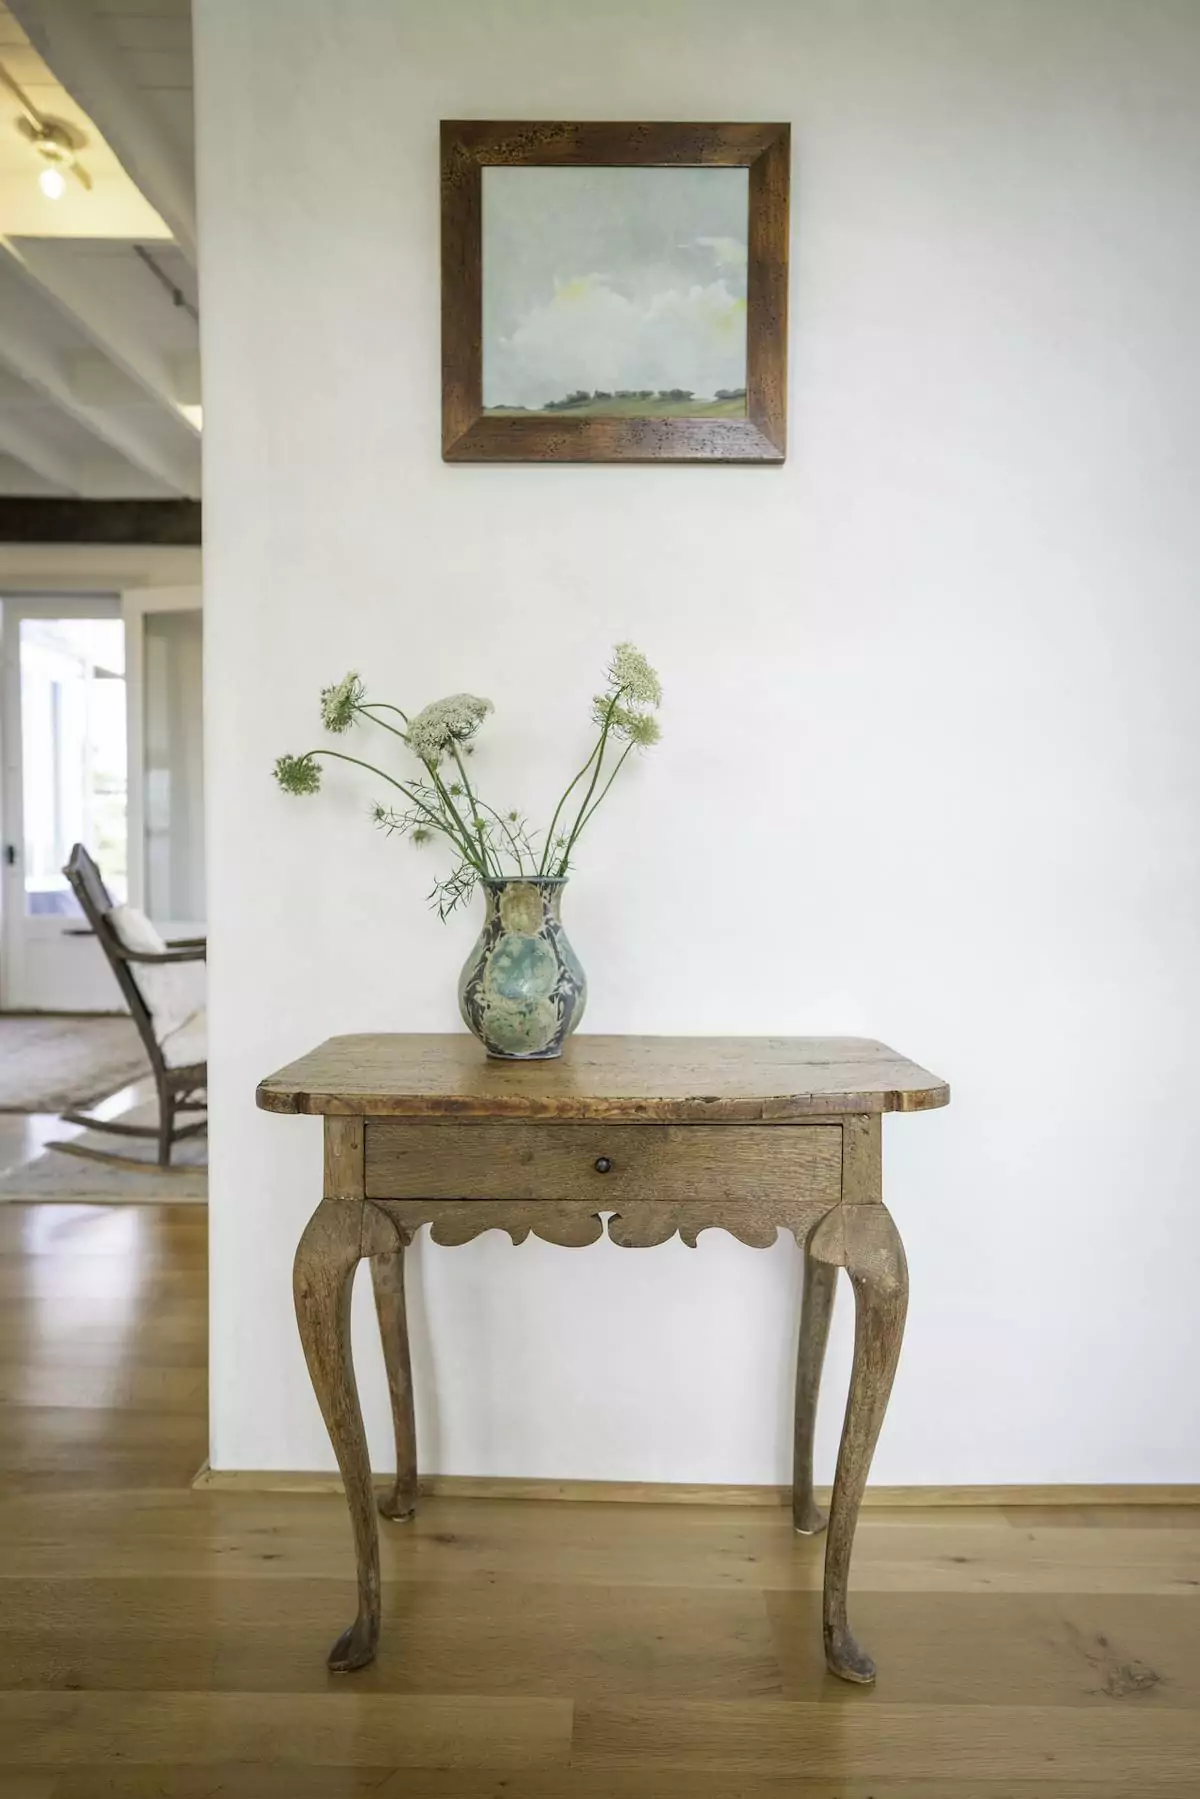 A wooden side table with vase